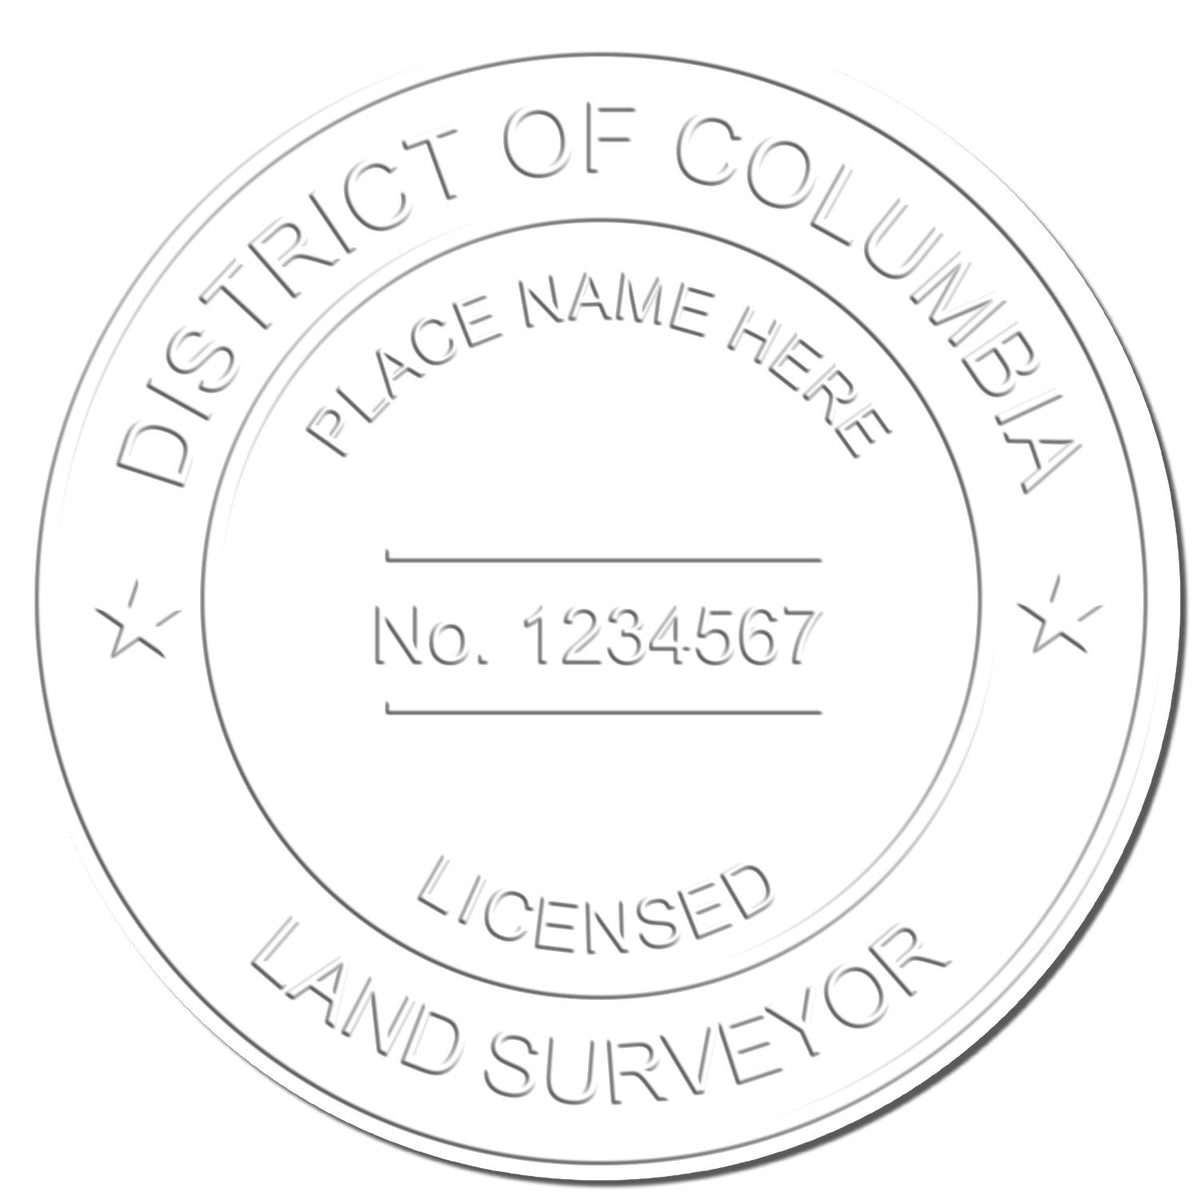 This paper is stamped with a sample imprint of the District of Columbia Soft Land Surveyor Embossing Seal, signifying its quality and reliability.